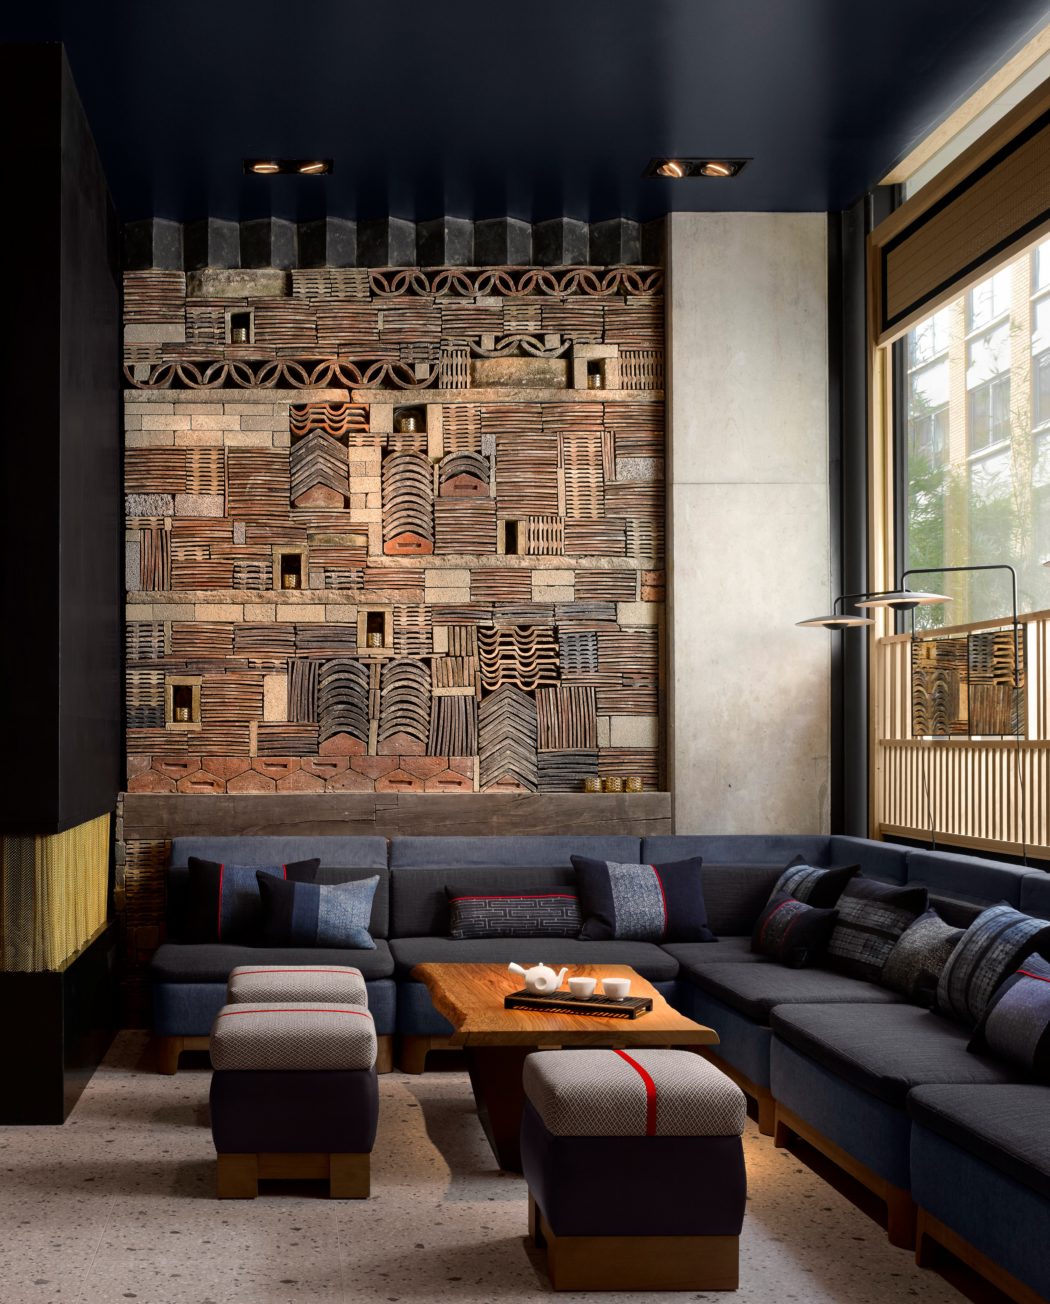 Nobu Hotel Shoreditch by Ben Adams Architects and Studio Mica and Studio - 1